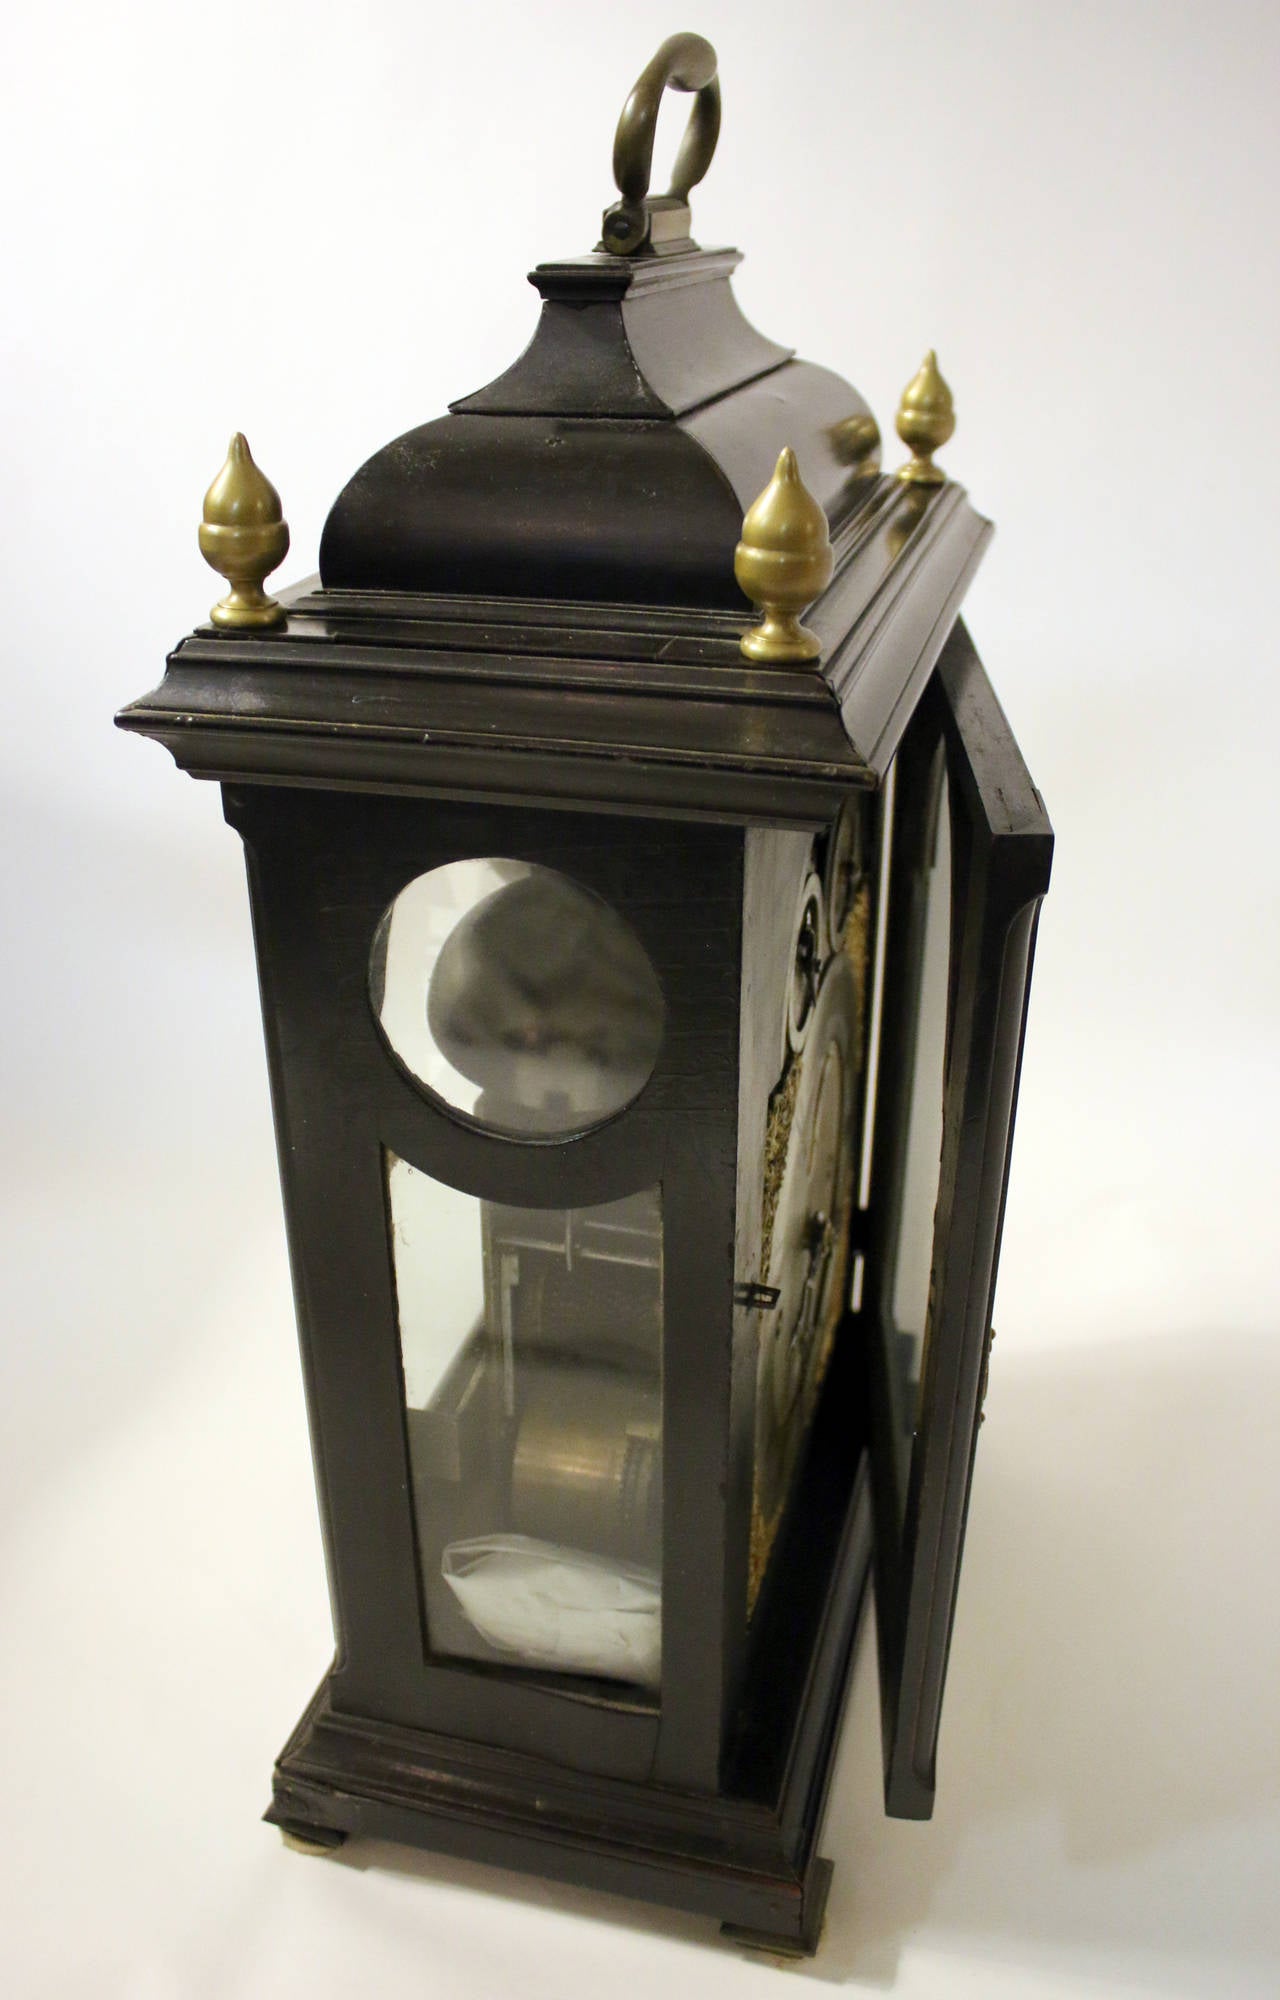 Late 18th Century 18th Century Bracket Clock by E. Prideaux